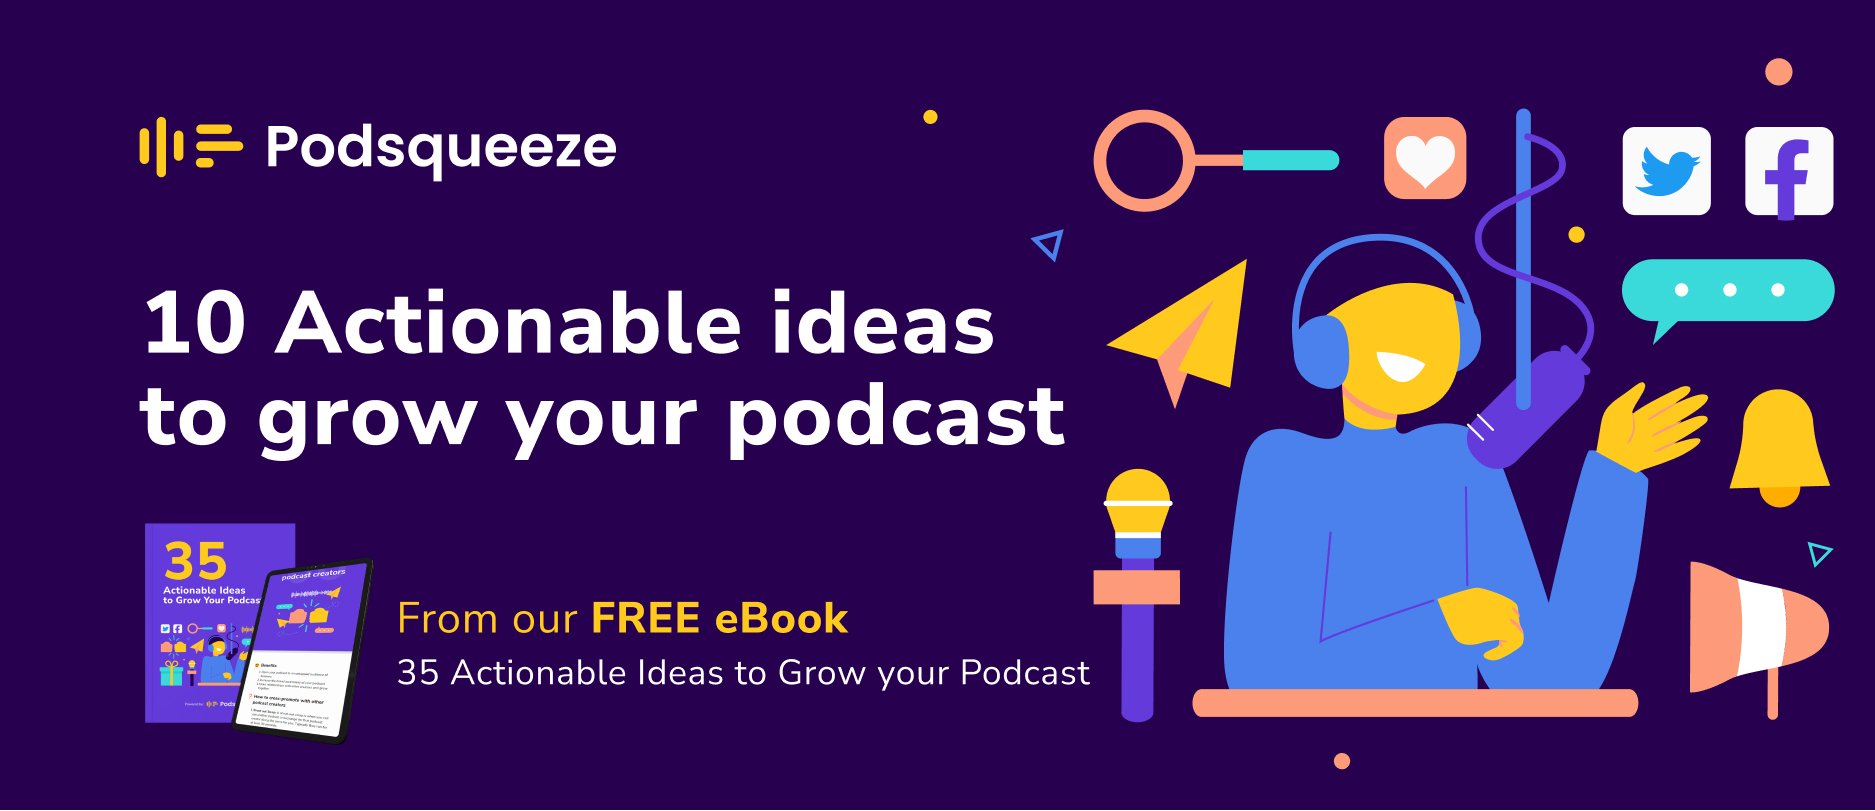 10 actionable ideas to promote your podcast and grow your audience